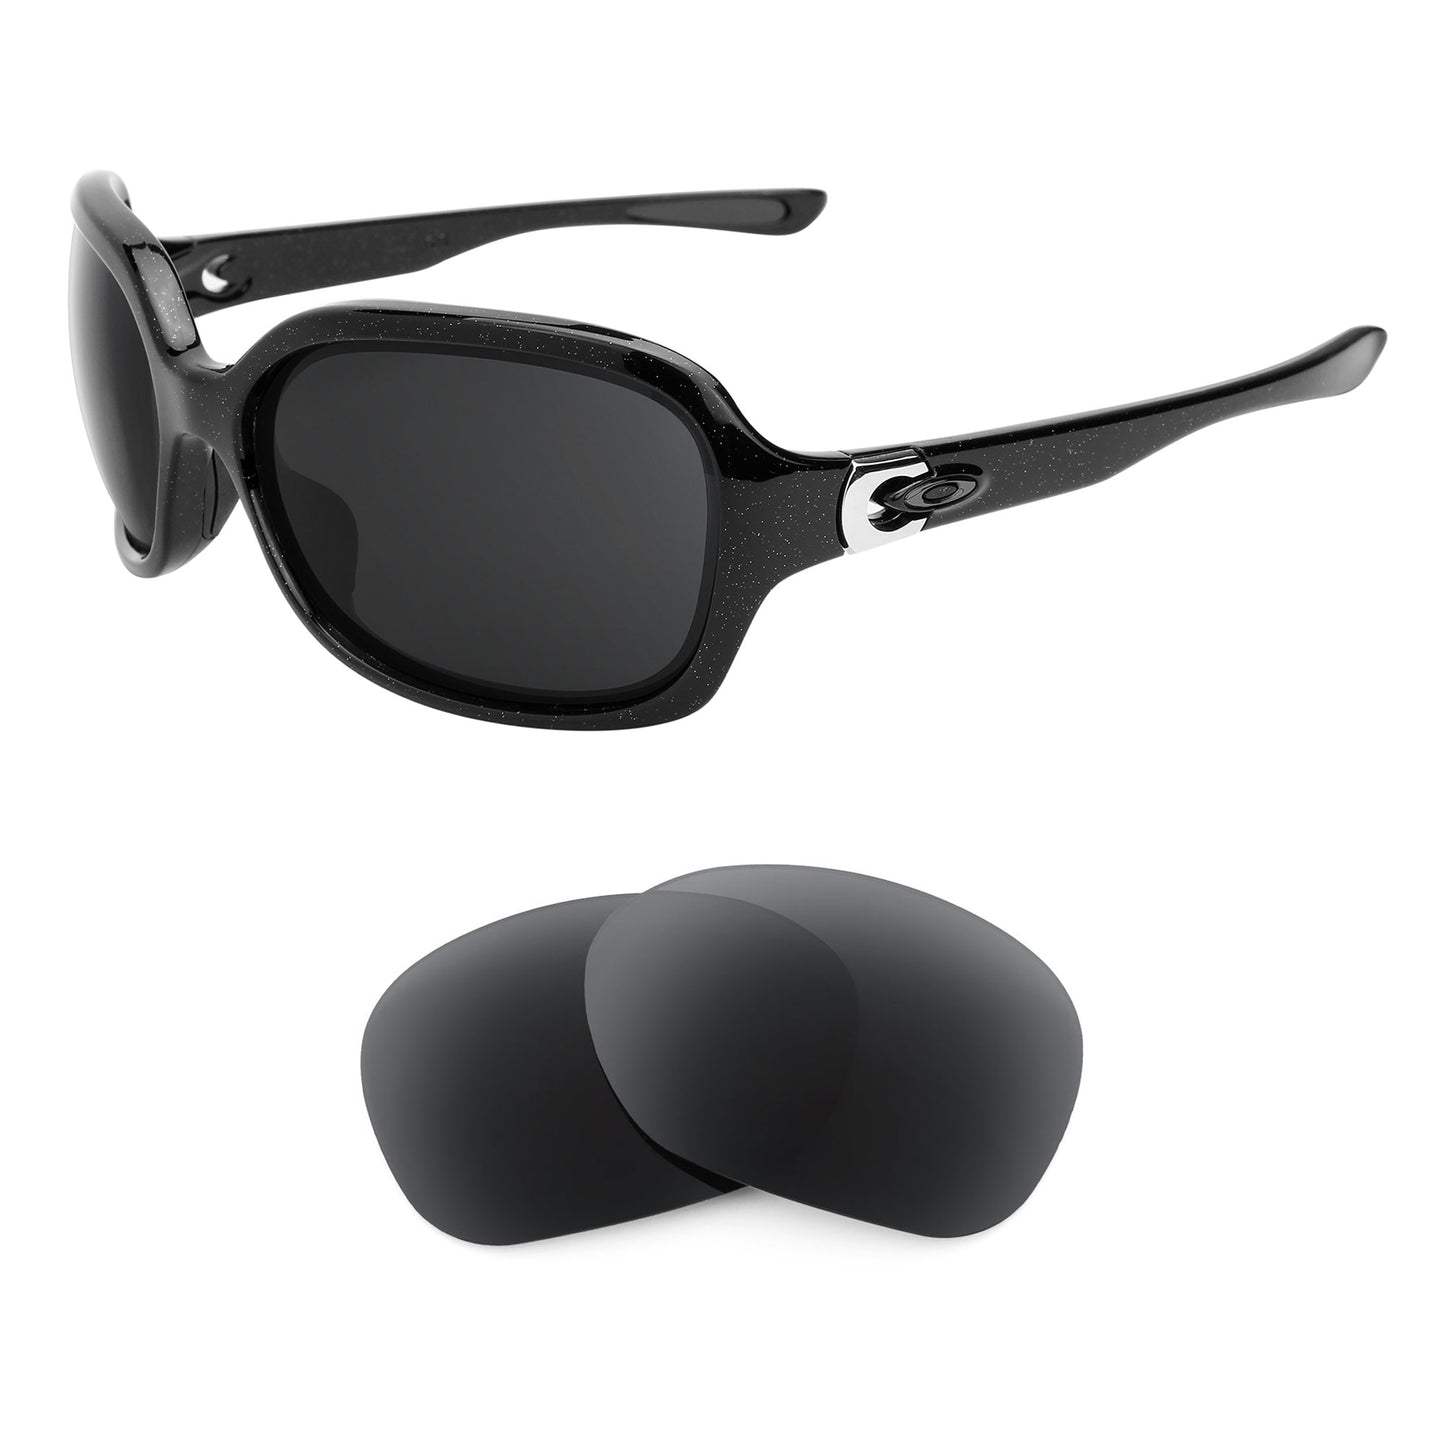 Oakley Pulse sunglasses with replacement lenses